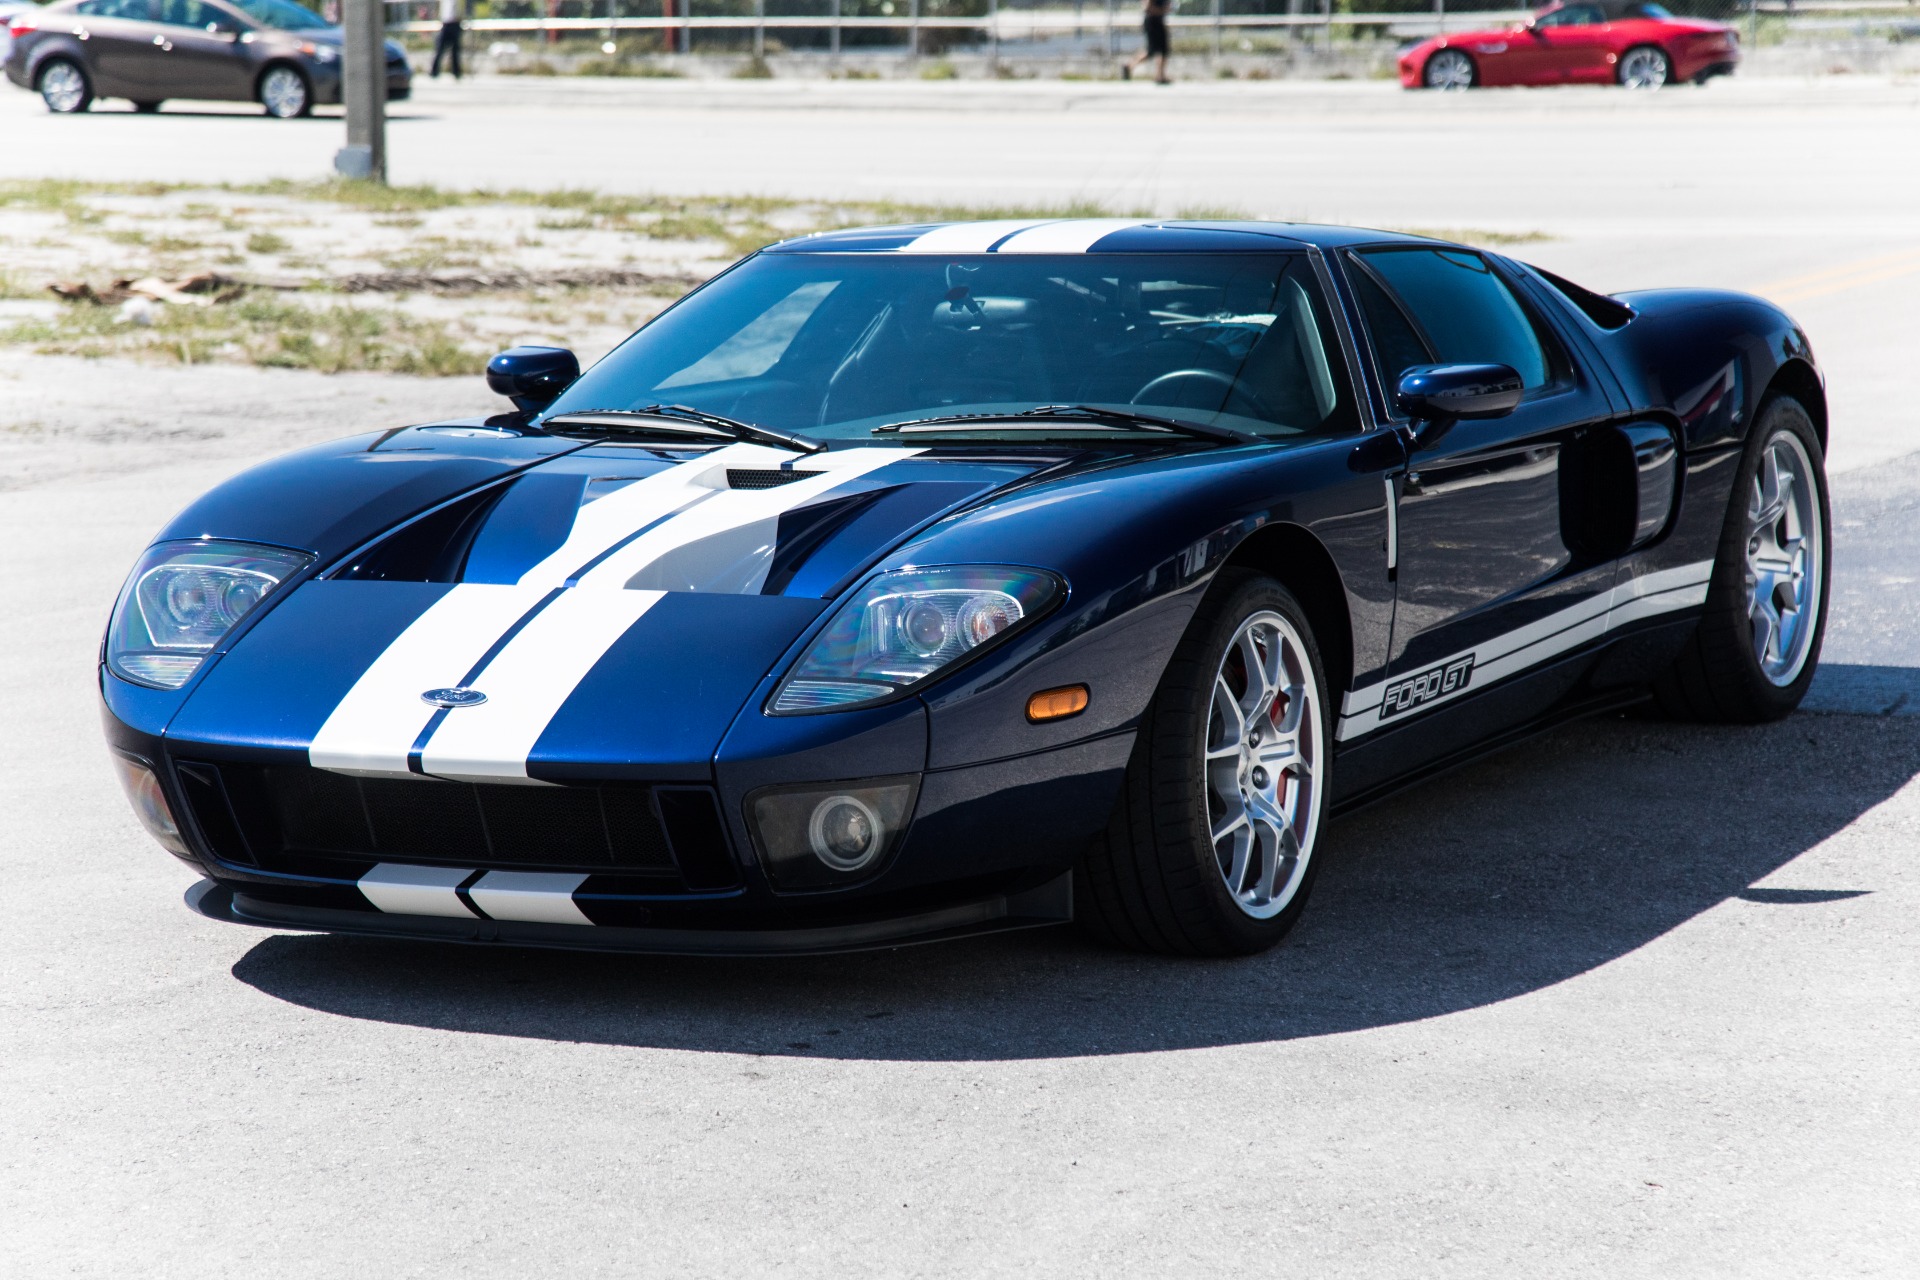 Used 2005 Ford GT For Sale (299,900) Marino Performance Motors Stock